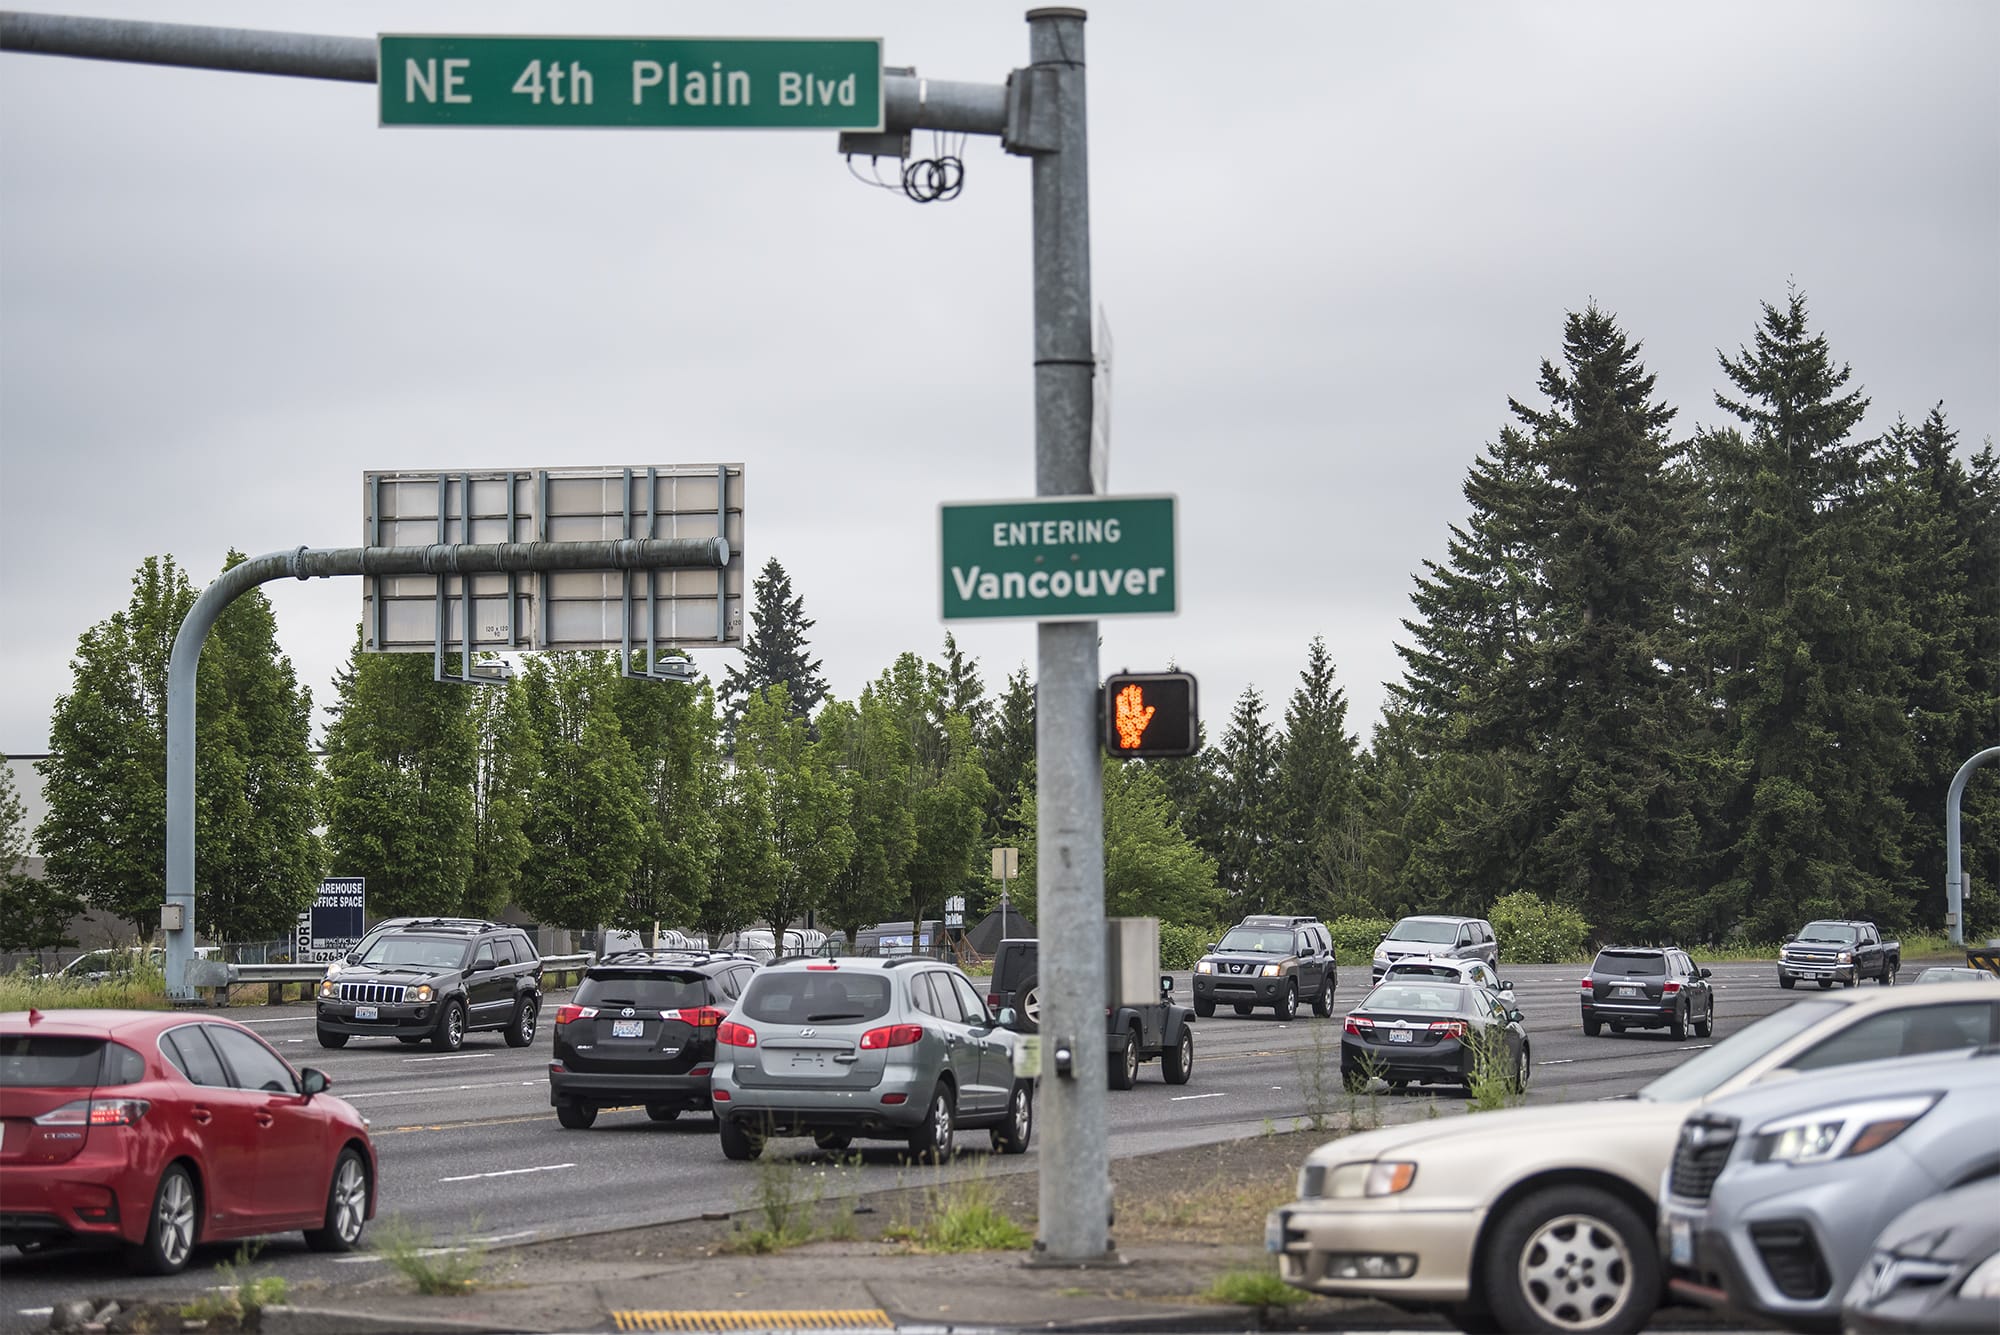 Commuters drive through the intersection of Highway 500 and Northeast Fourth Plain Boulevard during rush hour on May 23.